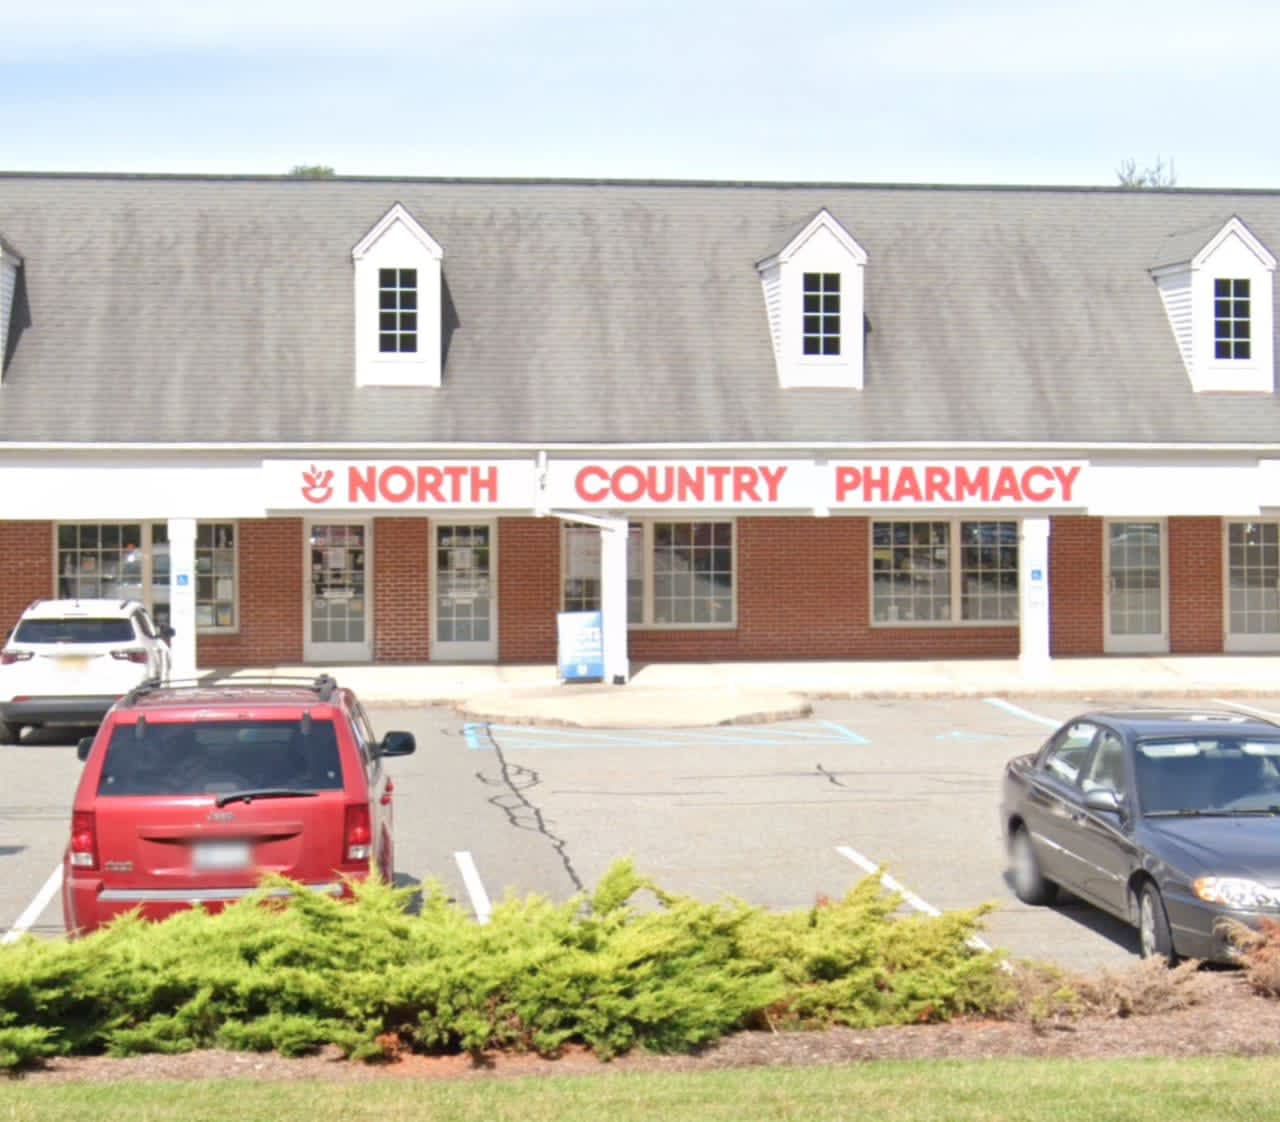 North Country Pharmacy on Munsonhurst Road in Franklin